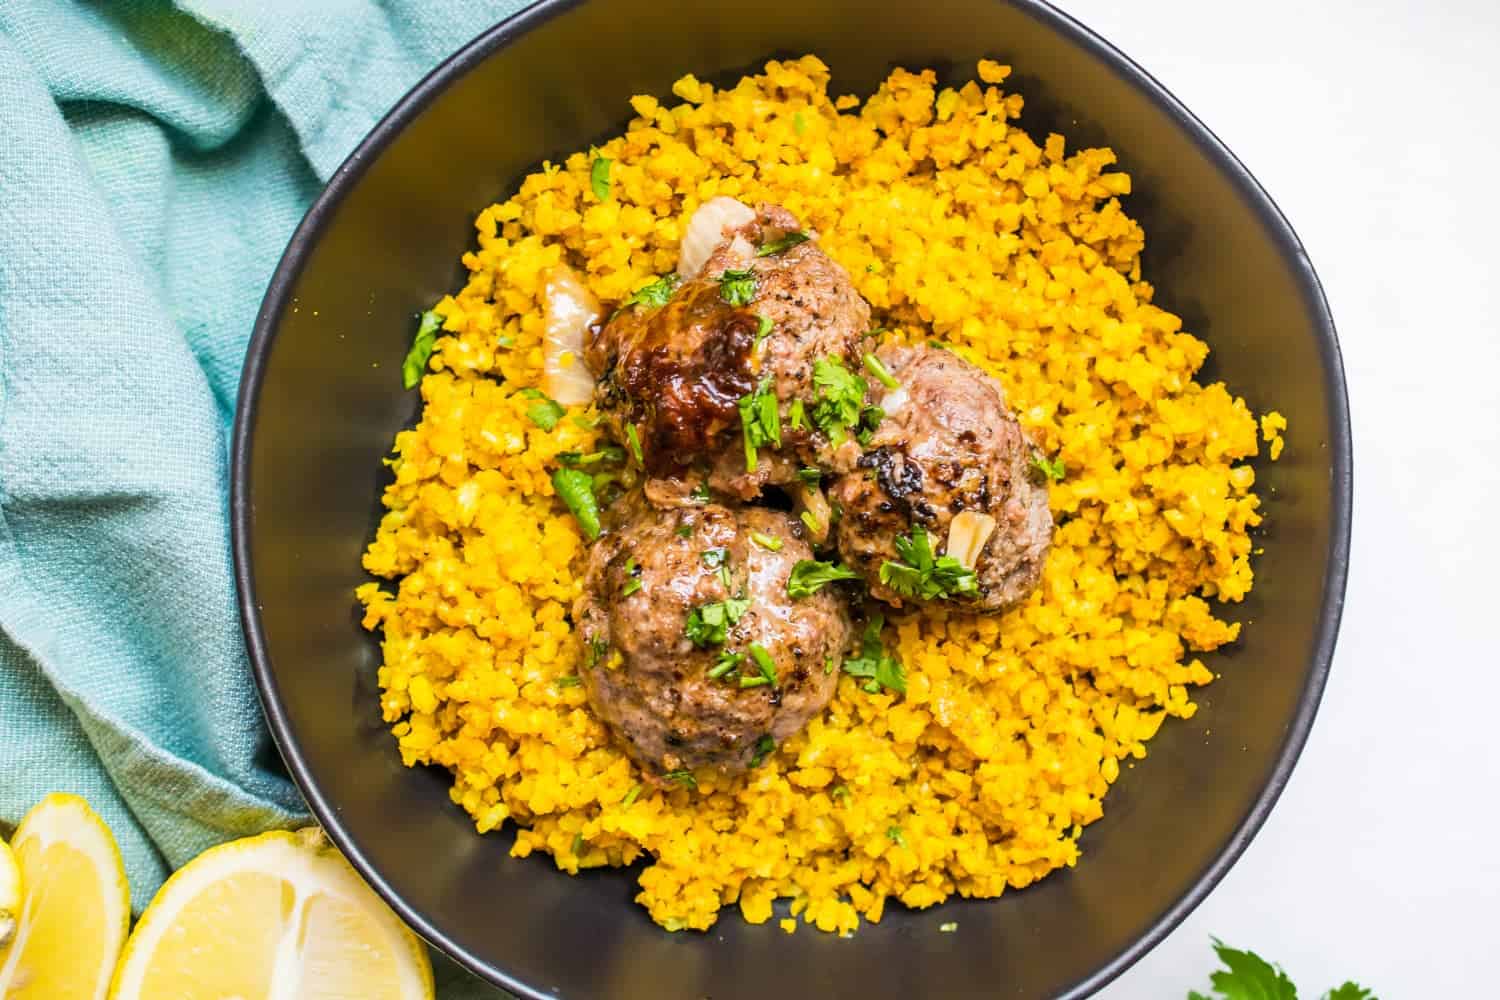 three carne asada meatballs over yellow rice garnished with cilantro in black bowl. half a lemon and blue cloth in background